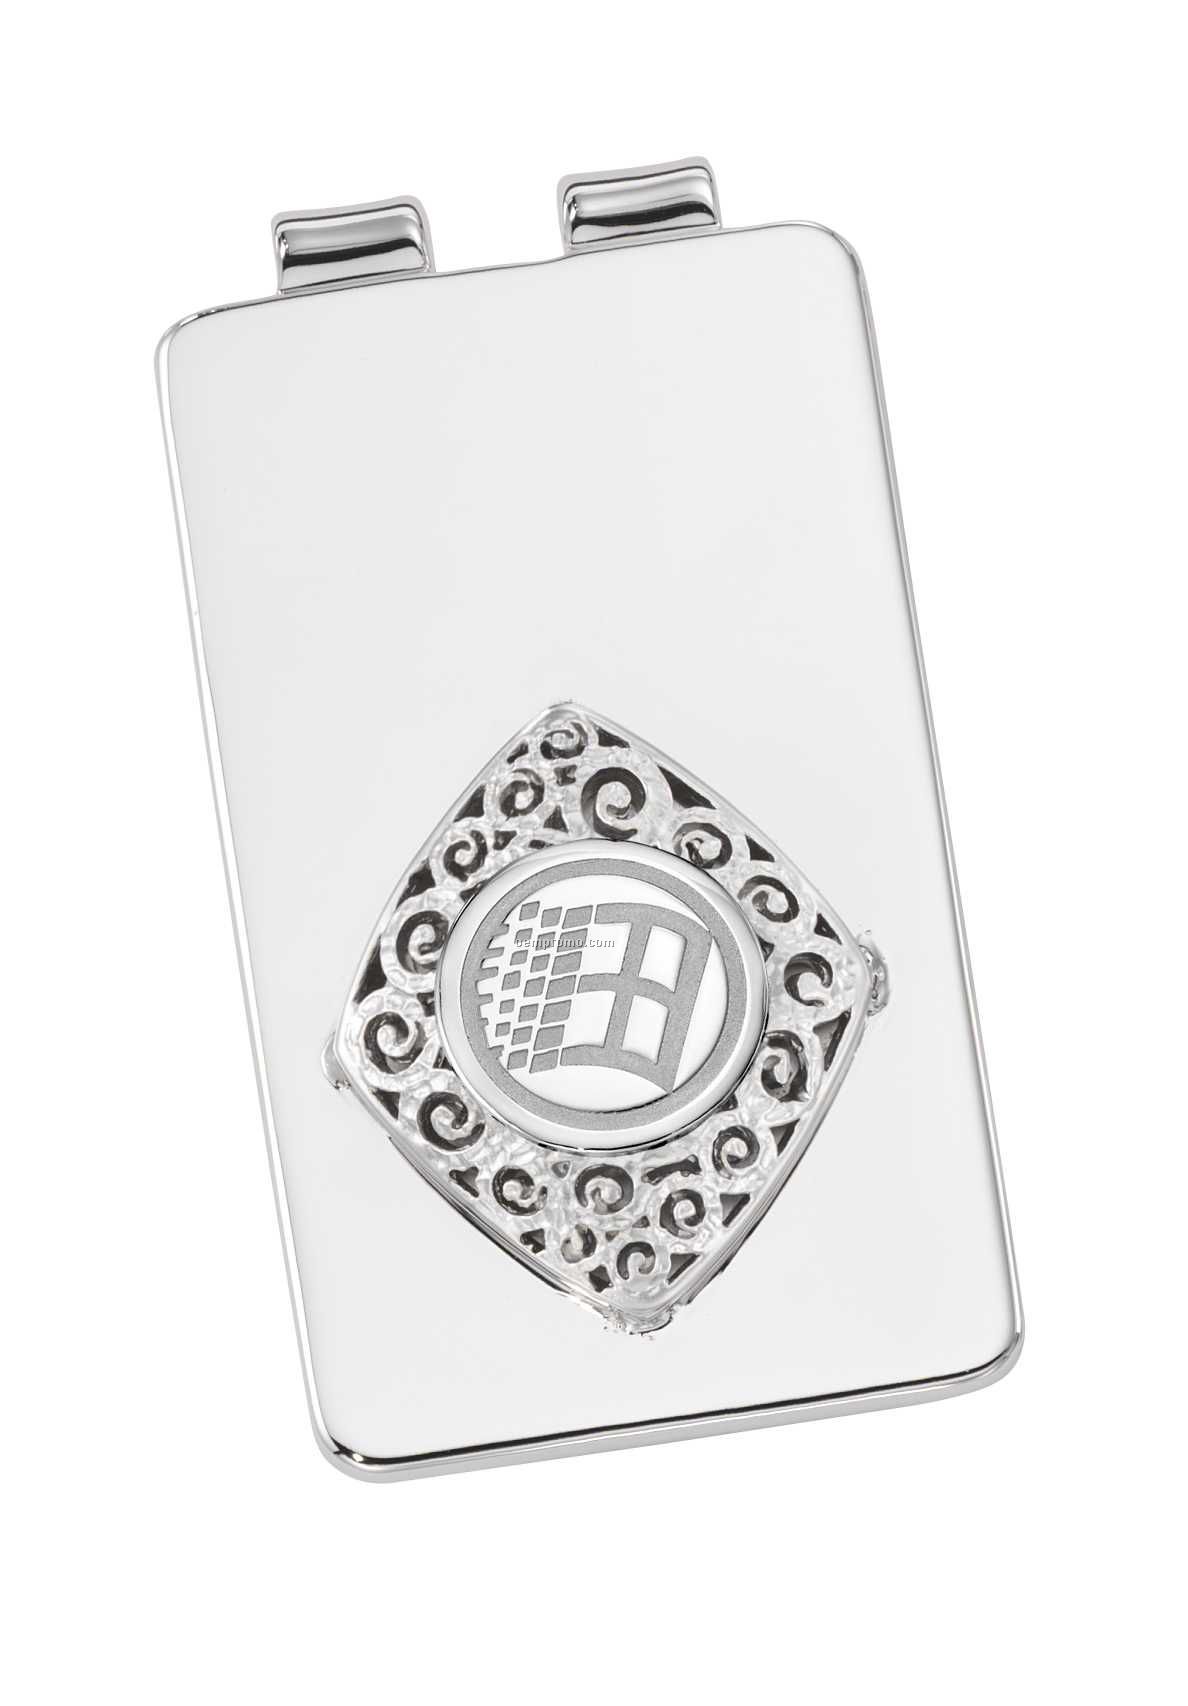 Ovations - Grandeur Silver Plated Money Clip - Round Area For Laser Engrave